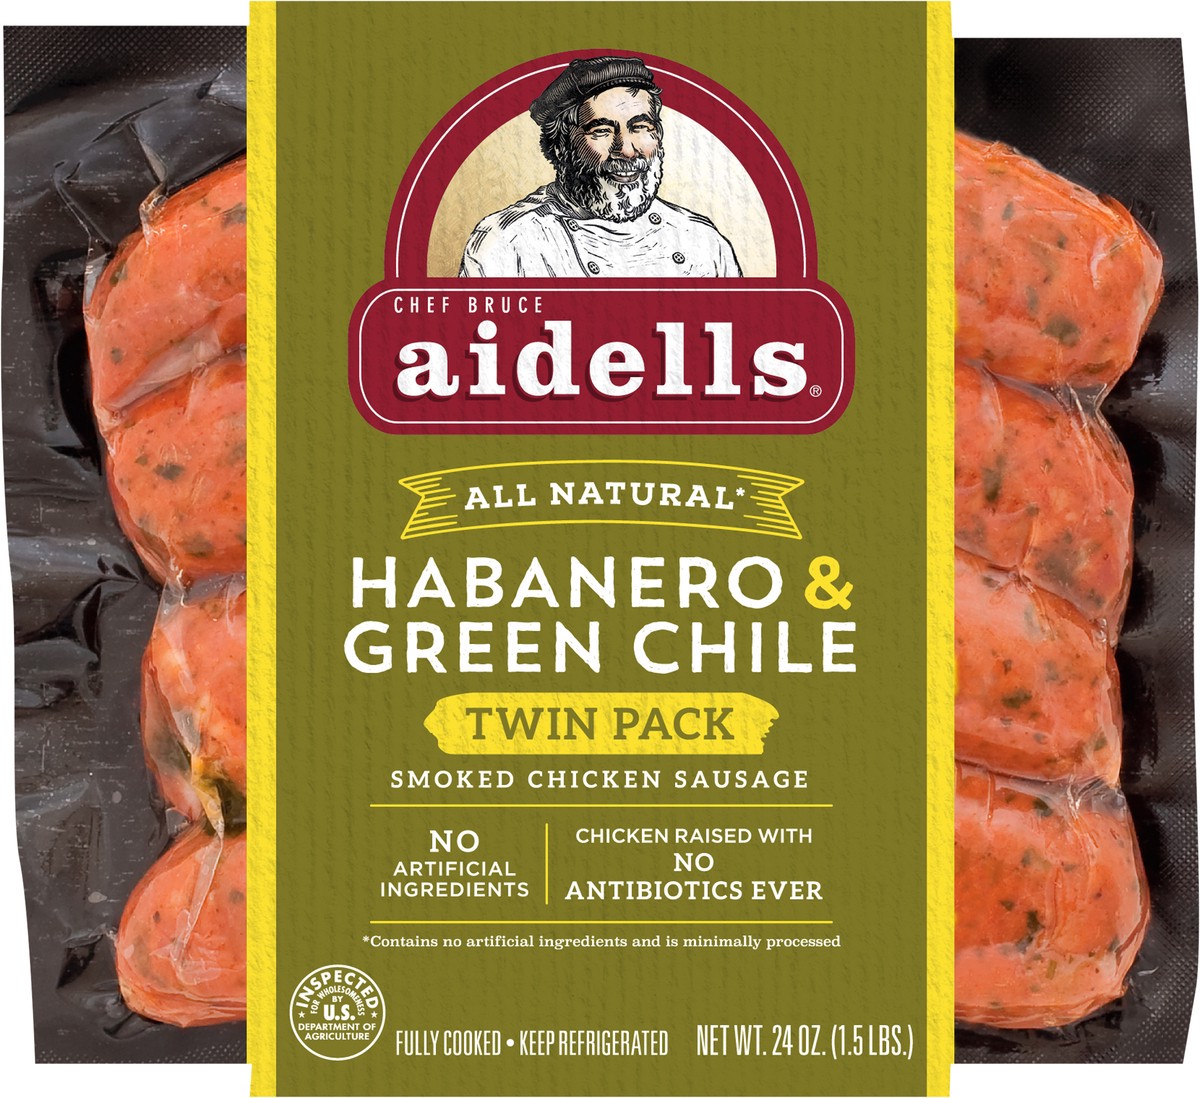 slide 5 of 8, Aidells Smoked Chicken Sausage, Habanero & Green Chile, Twin Pack, 24 oz. (8 Fully Cooked Links), 680.39 g